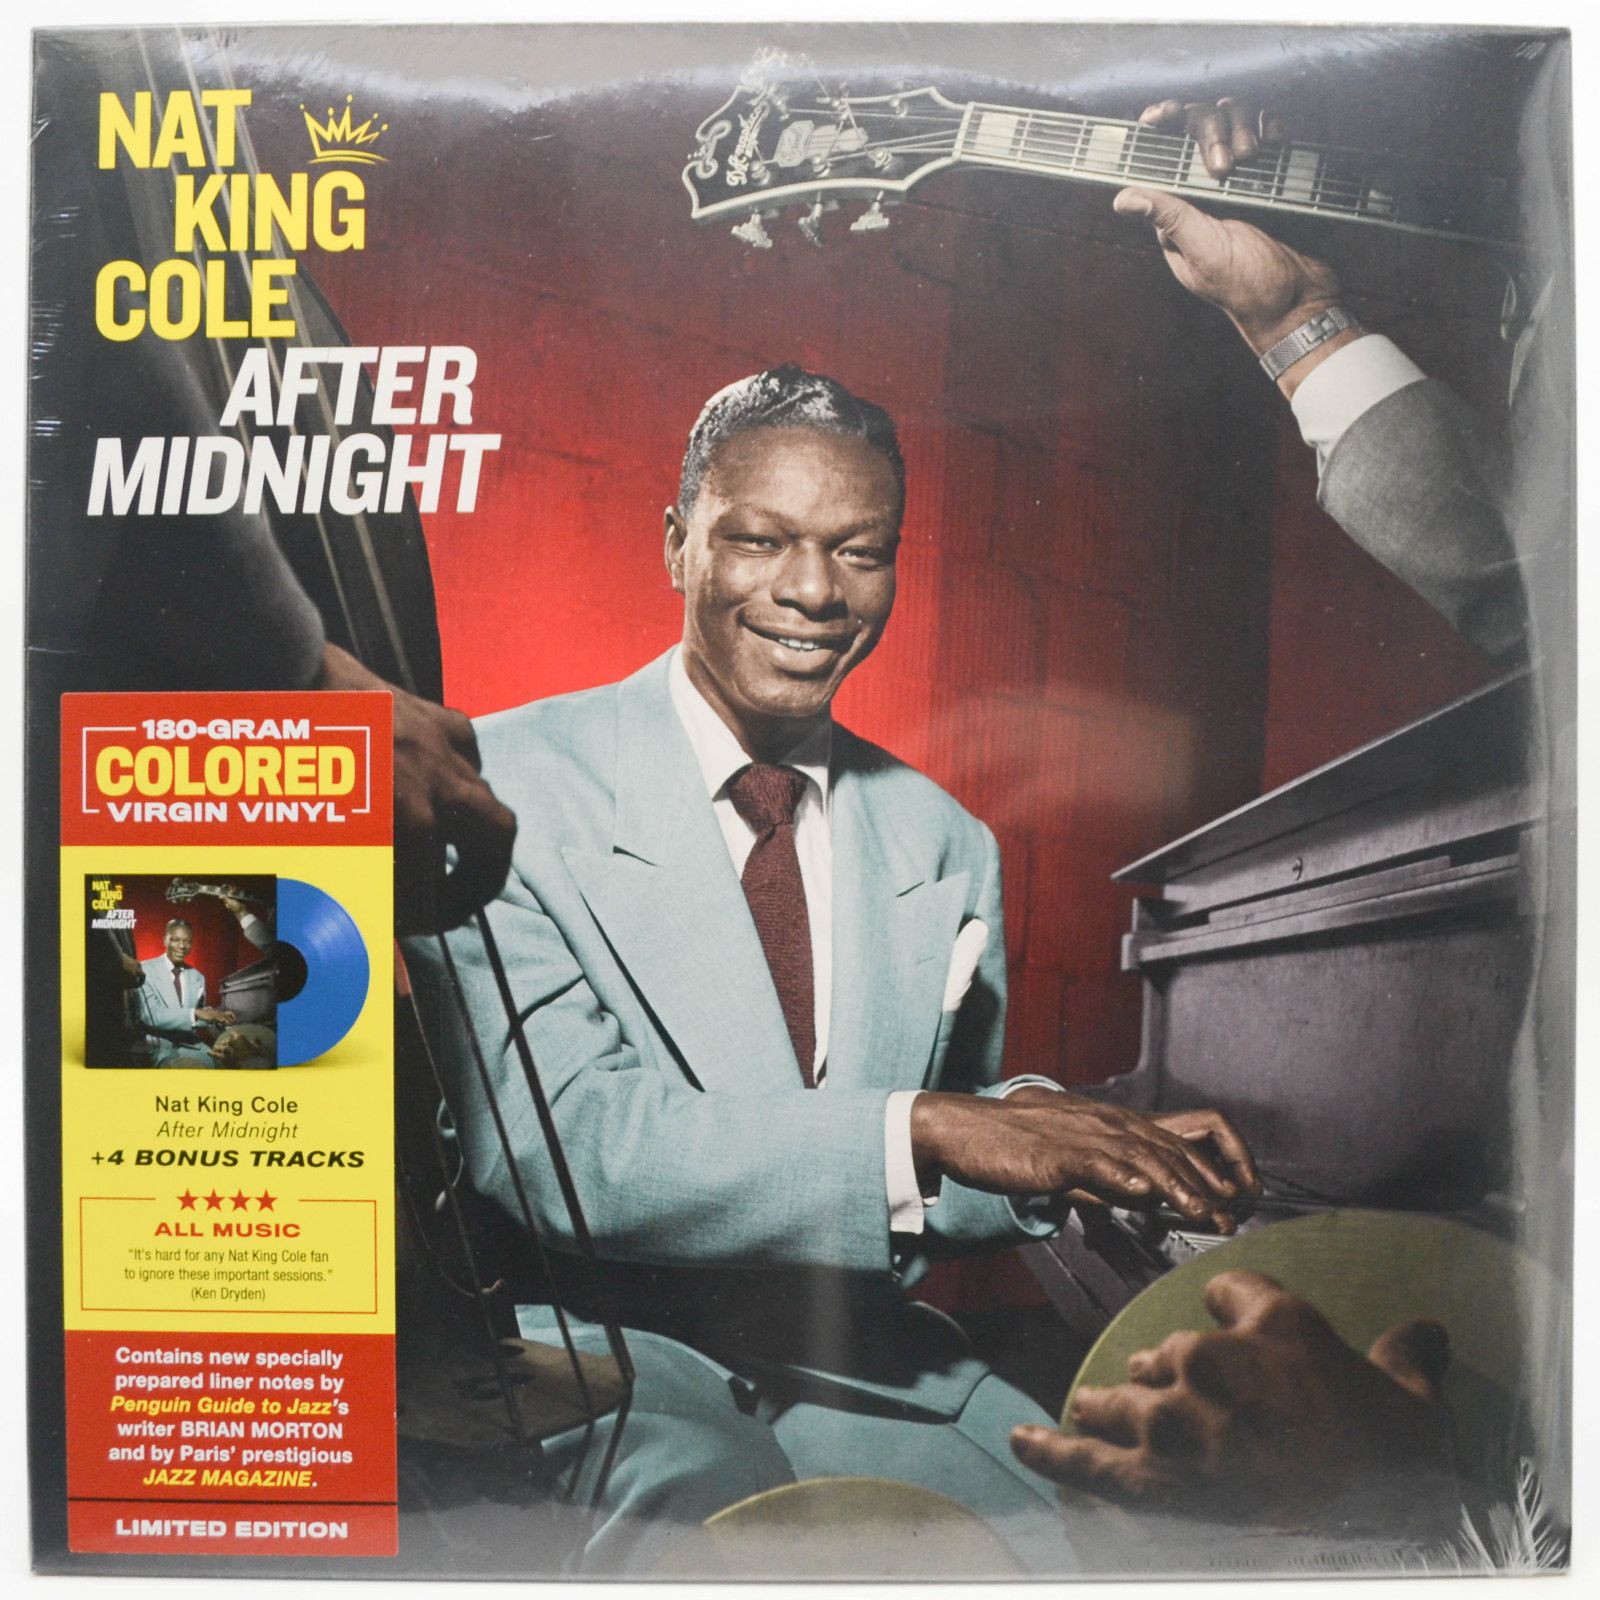 Nat King Cole — After Midnight, 1956